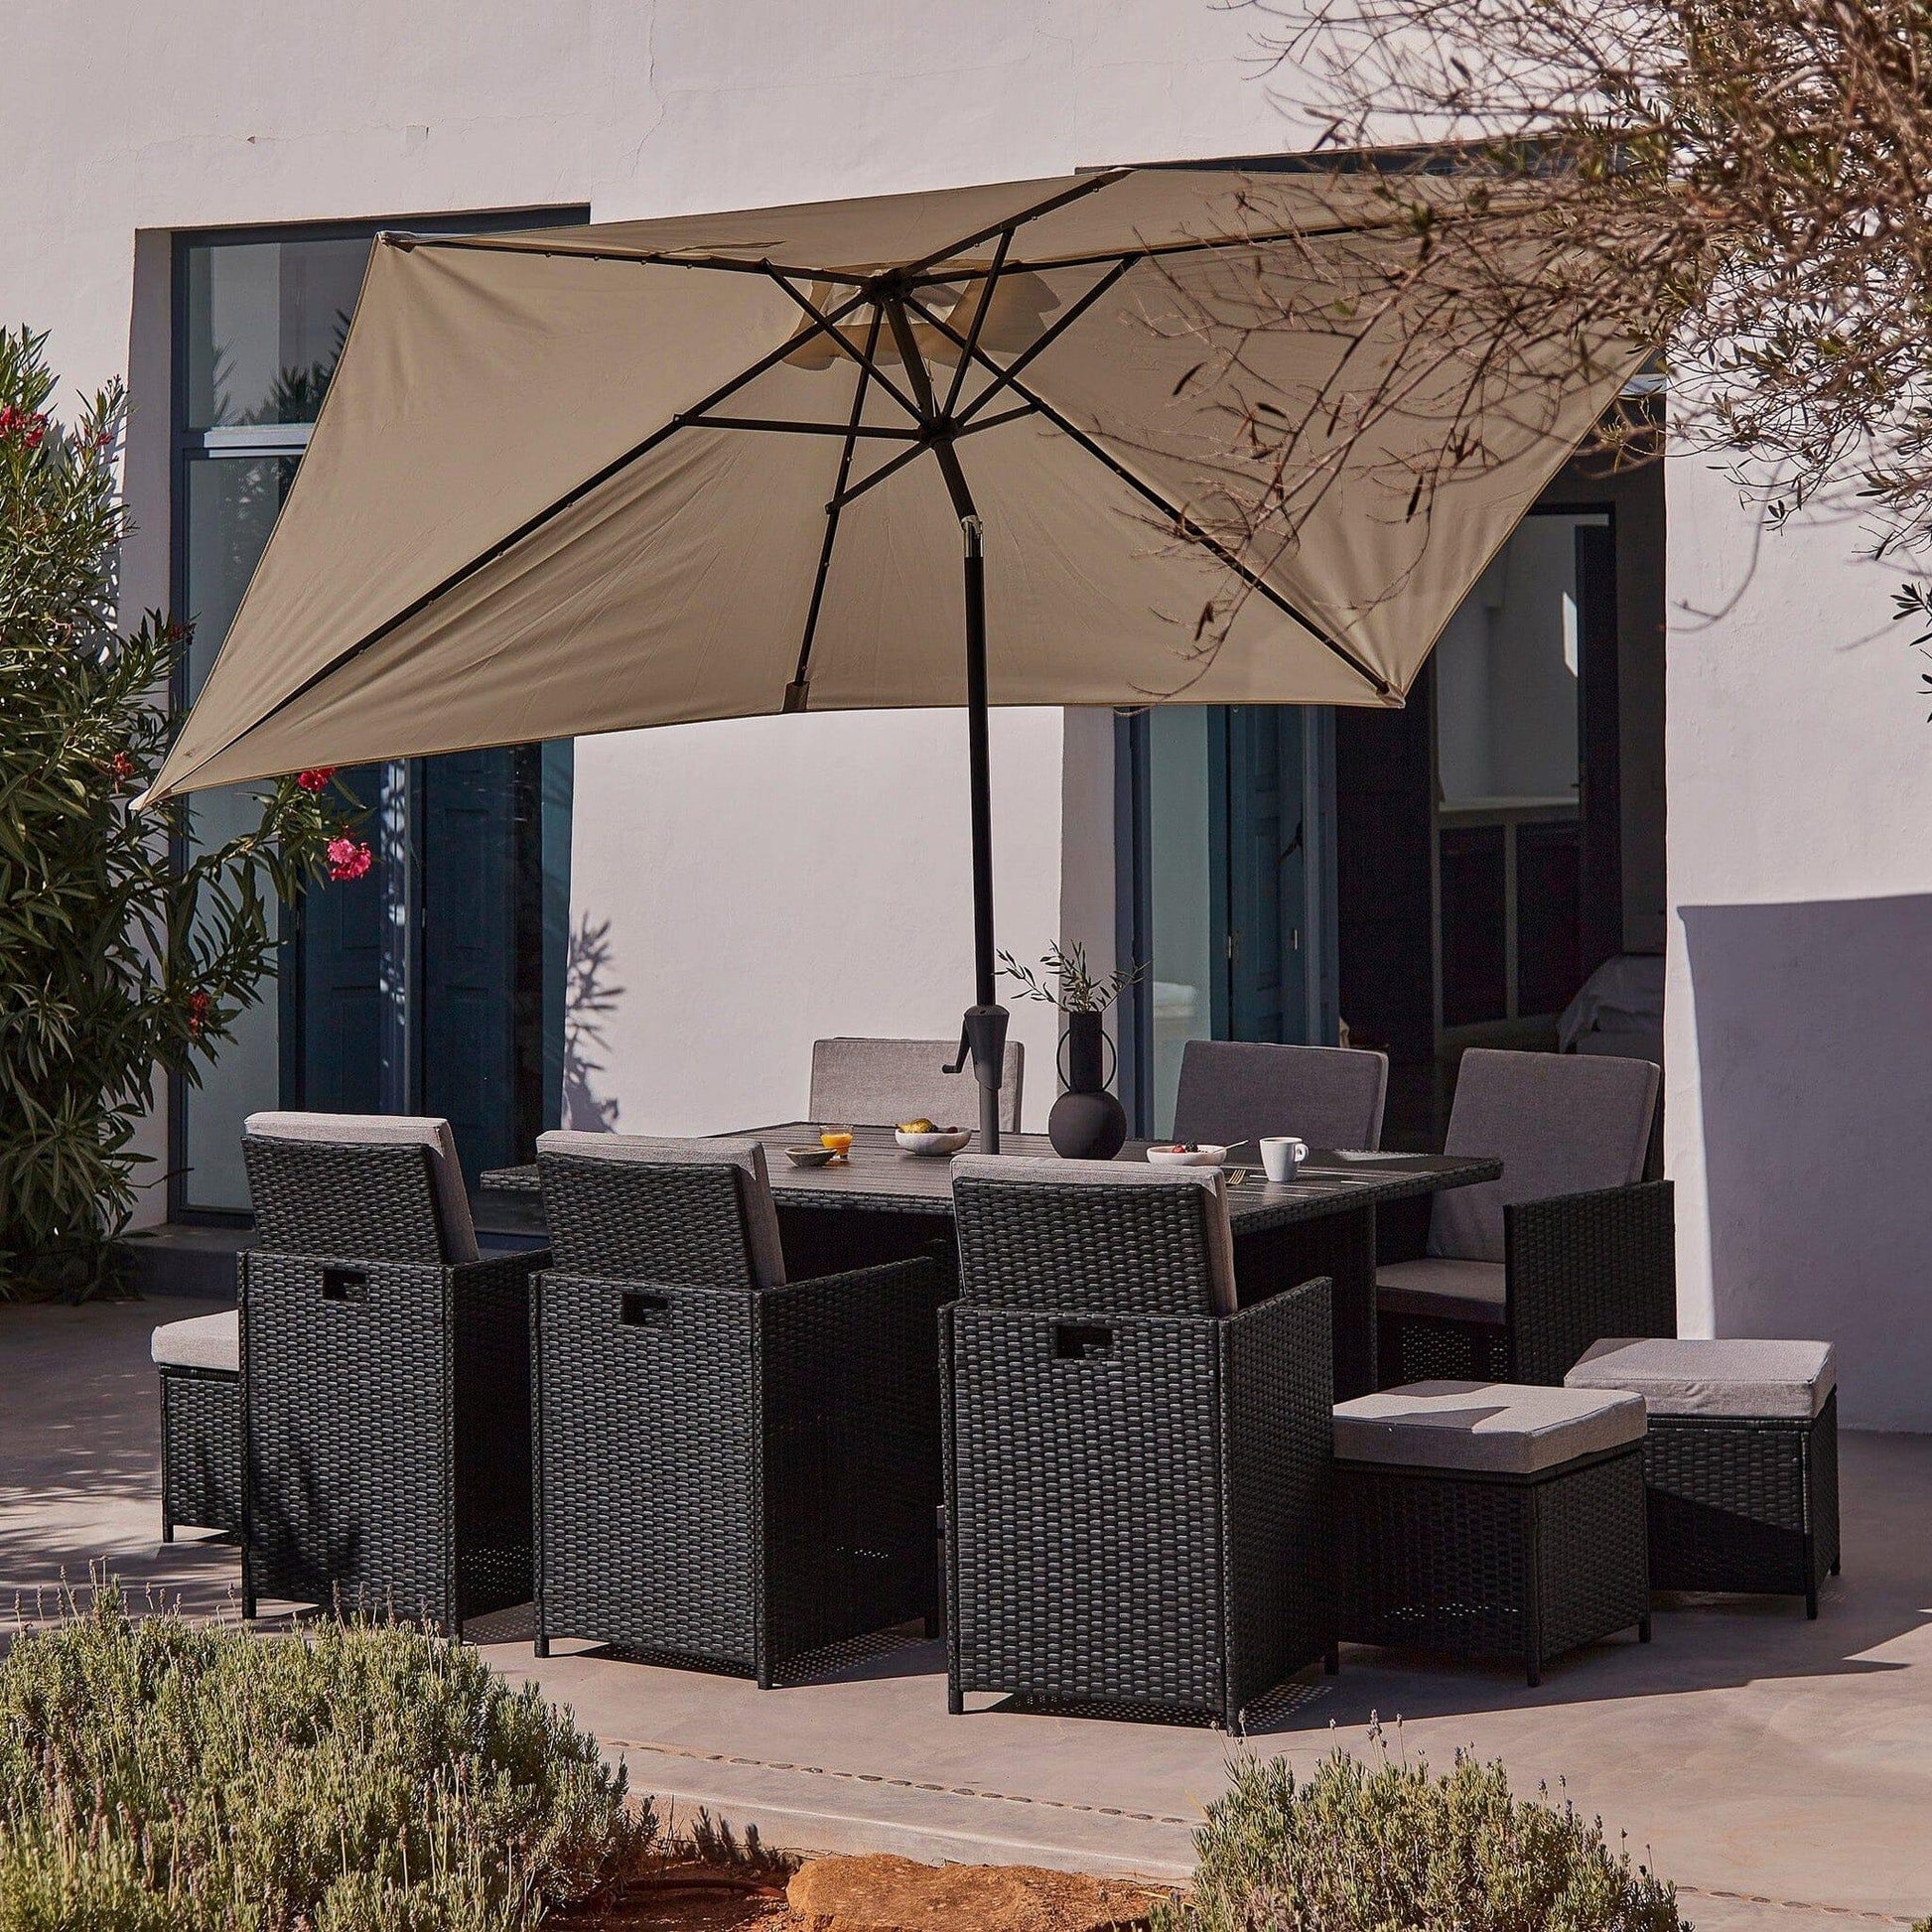 10 Seater Rattan Cube Outdoor Dining Set with Cream Parasol - Black Weave Polywood Top